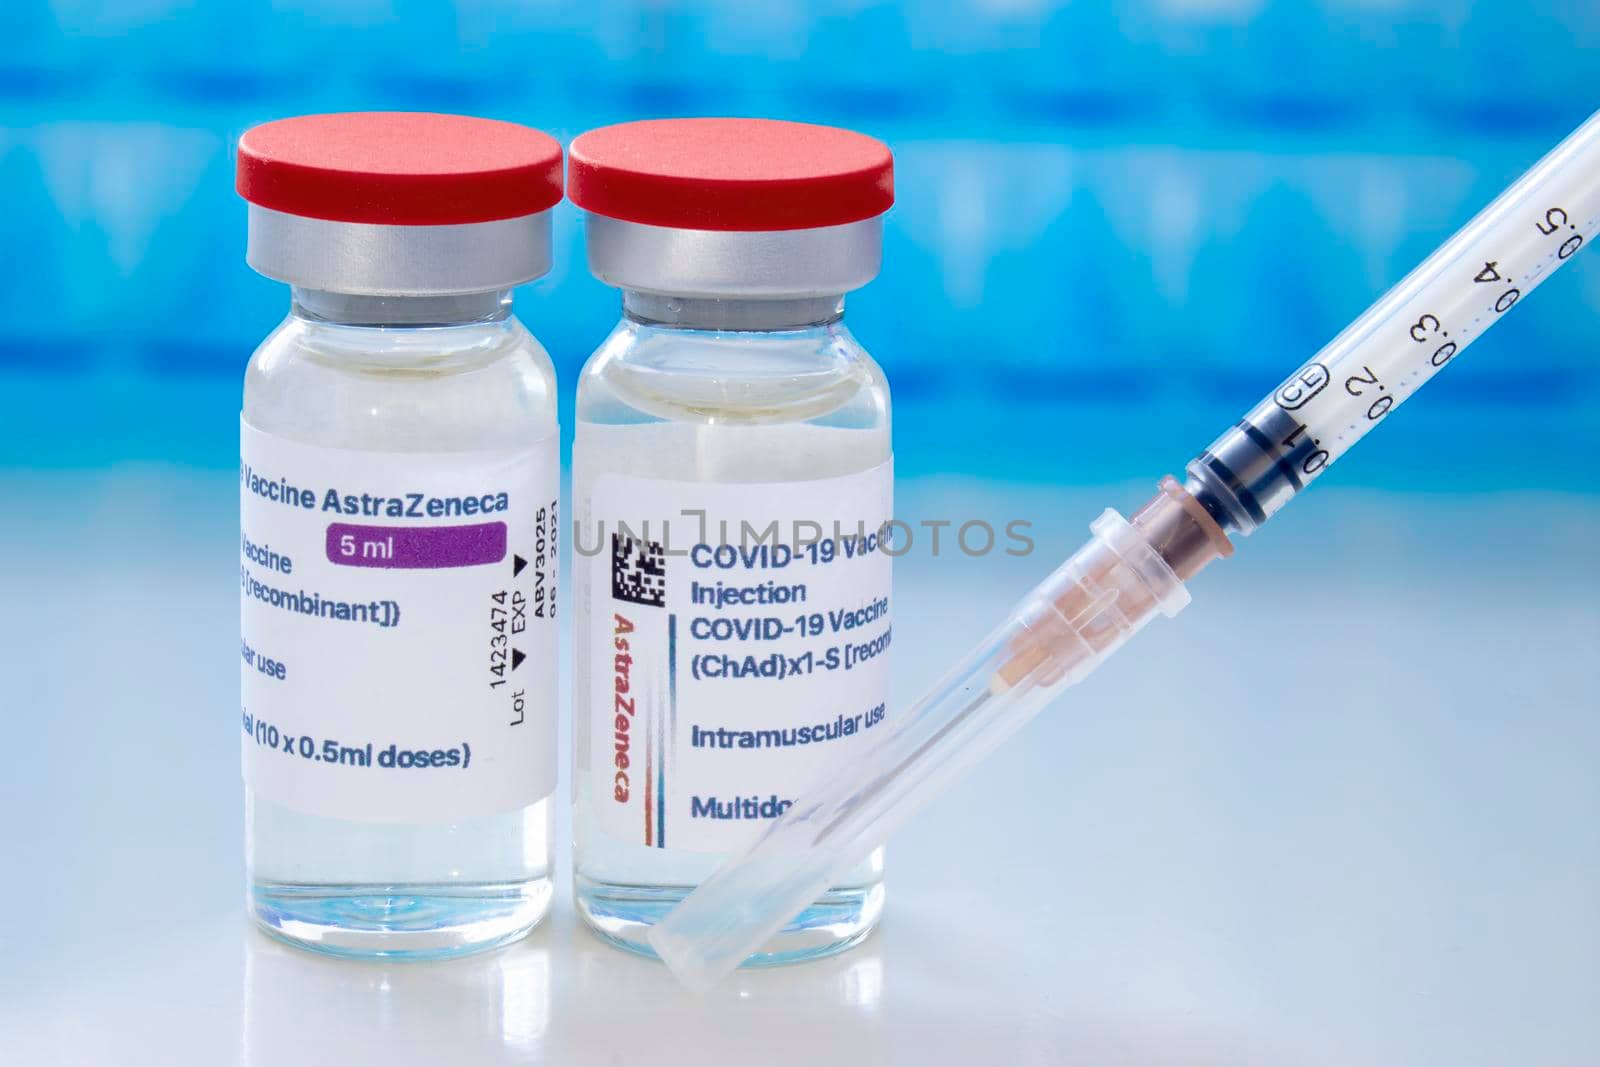 Calgary, Alberta, Canada. April 8, 2021. A couple of AstraZeneca dosis of Covid-19 vaccines on vial bottles and an injection syringe.